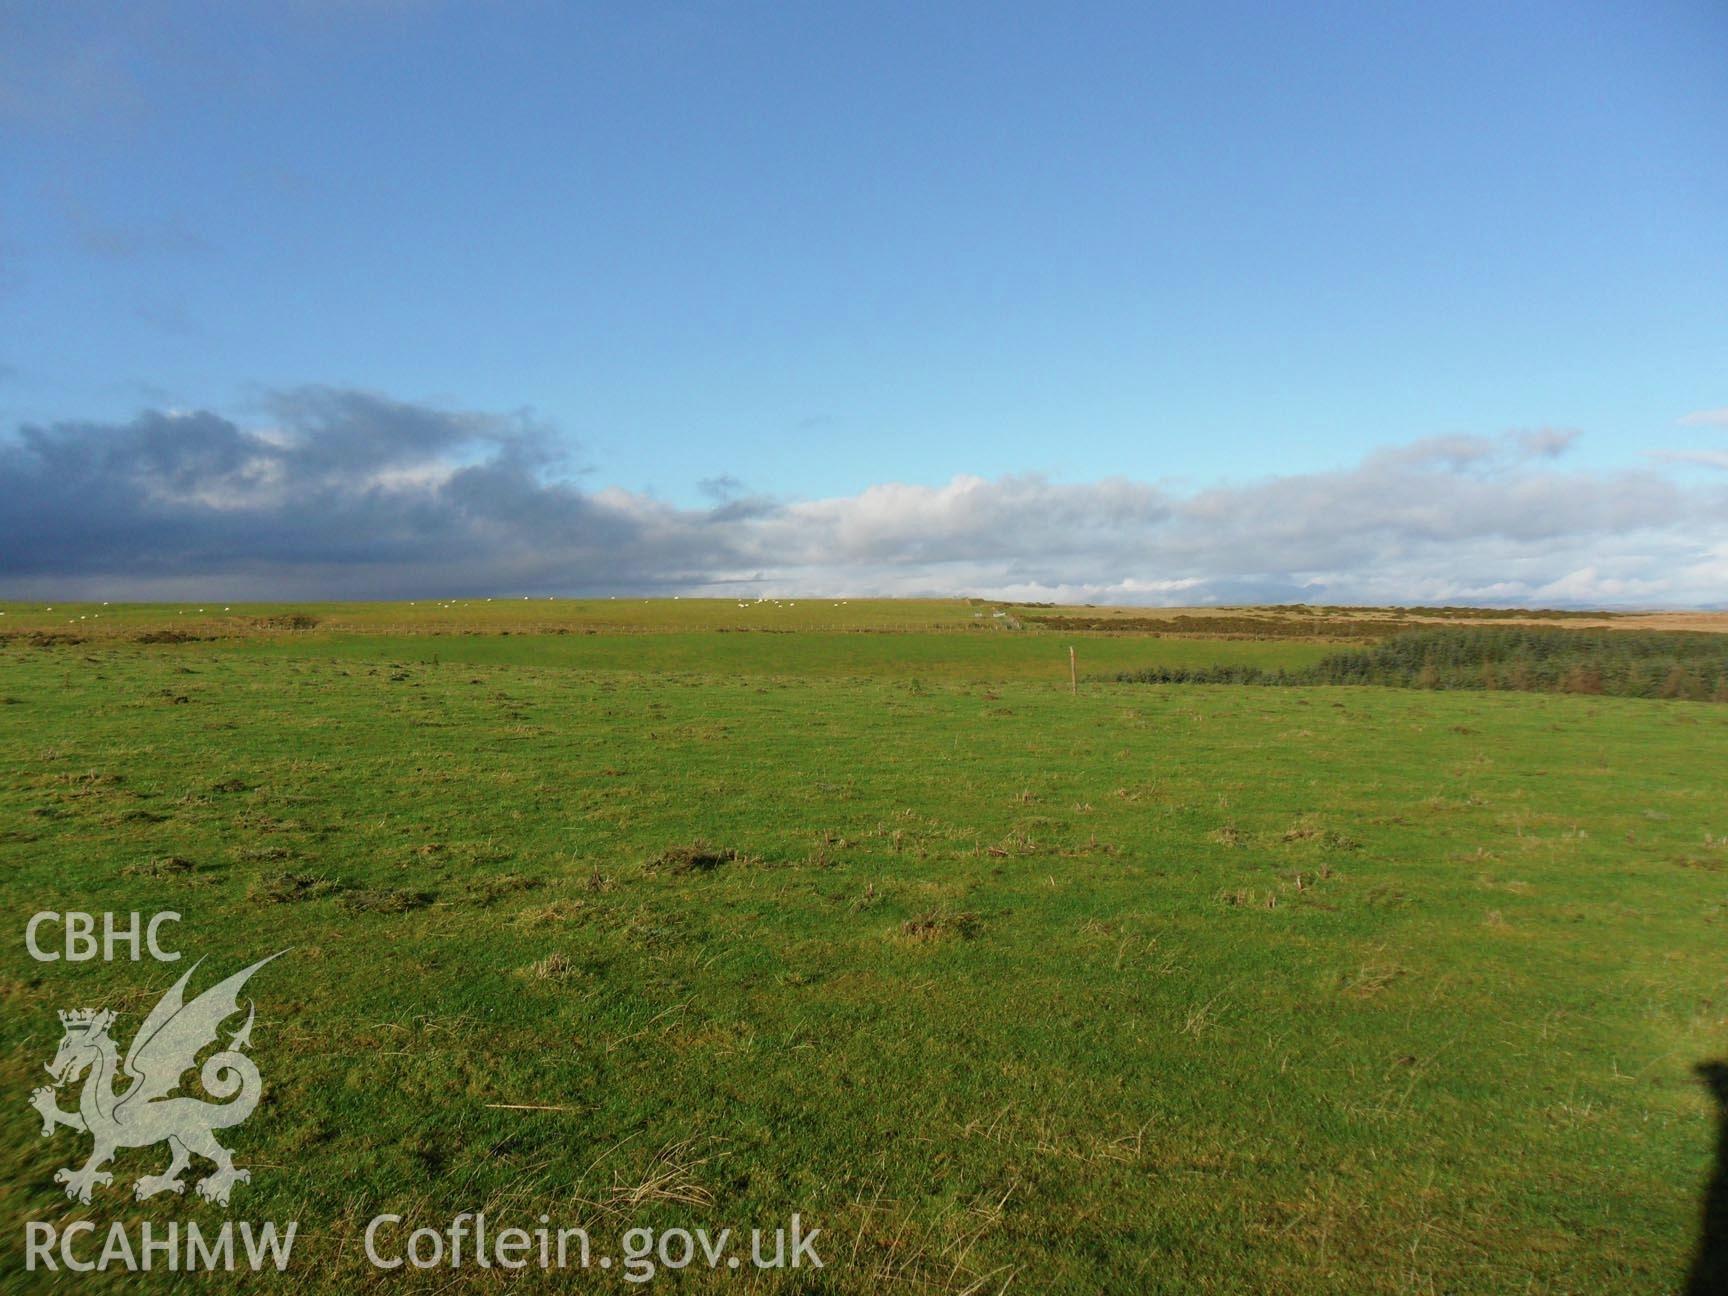 Digital colour photograph showing view of improved pasture on top of Y Foel, Looking north, Tan y Foel Quarry, Cefn Coch, report no. 1089.